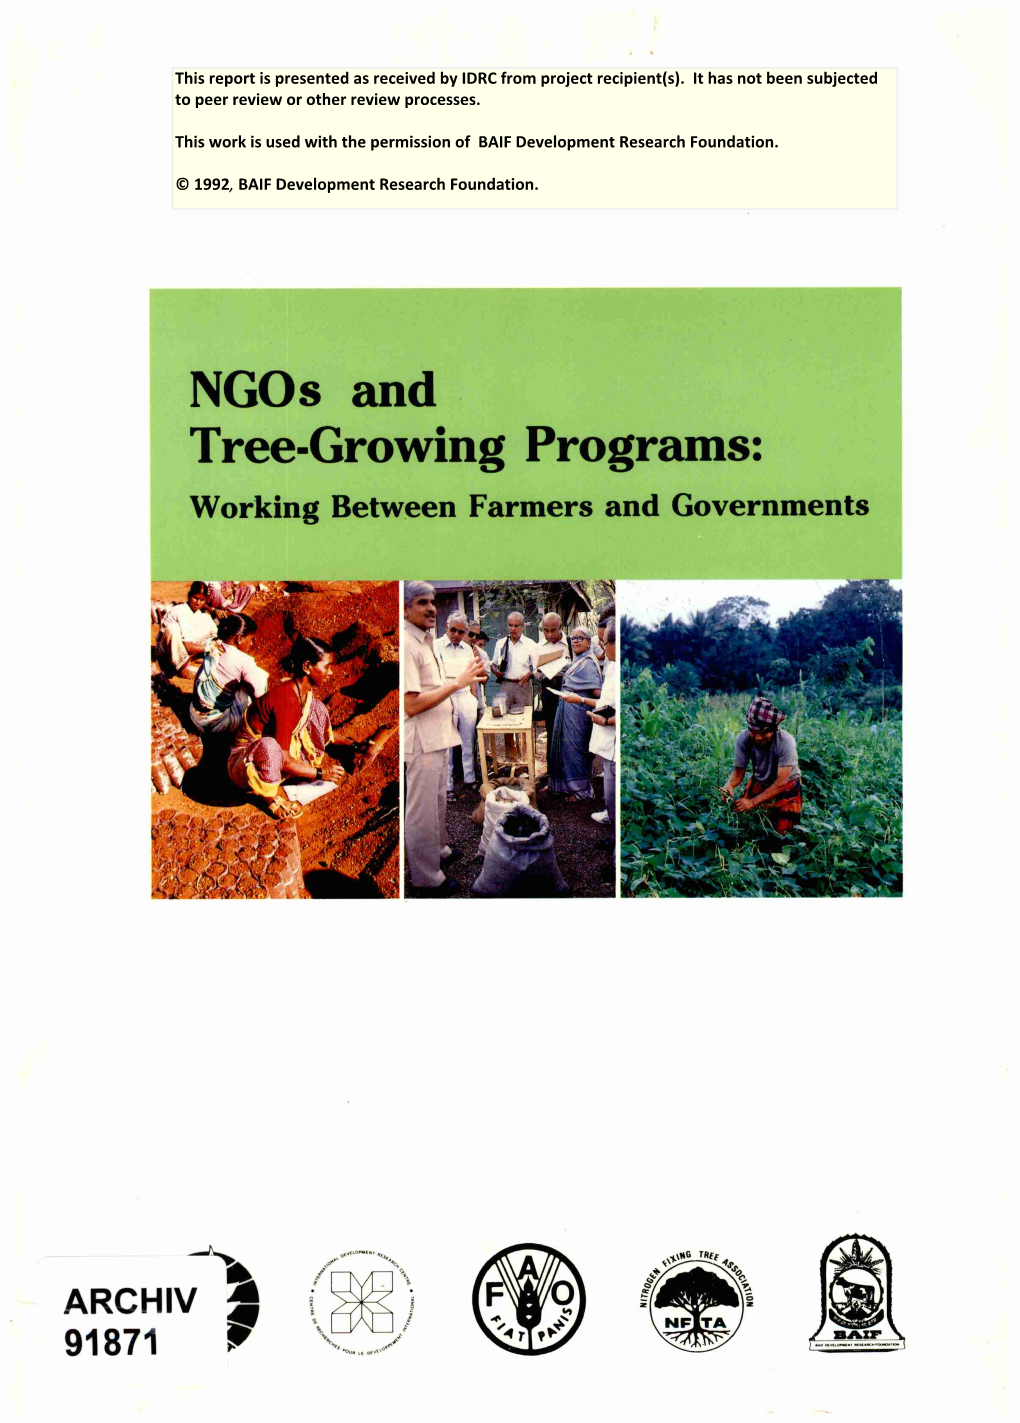 Tree-Growing Programs: Working Between Farmers and Governments